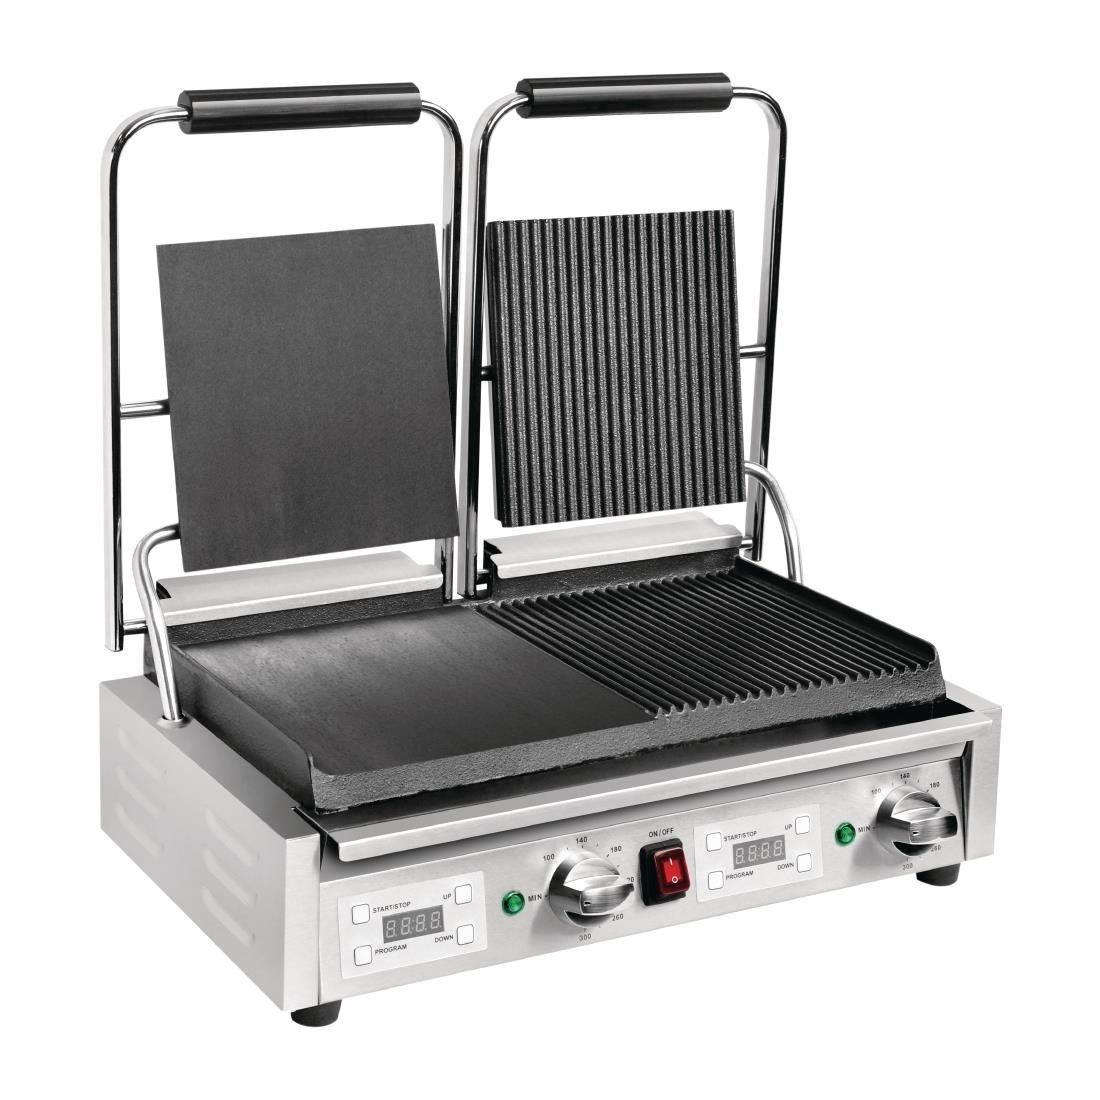 Dubbele Contactgrill | Glad/Groef | 2900W | 550x395x(H)210mm